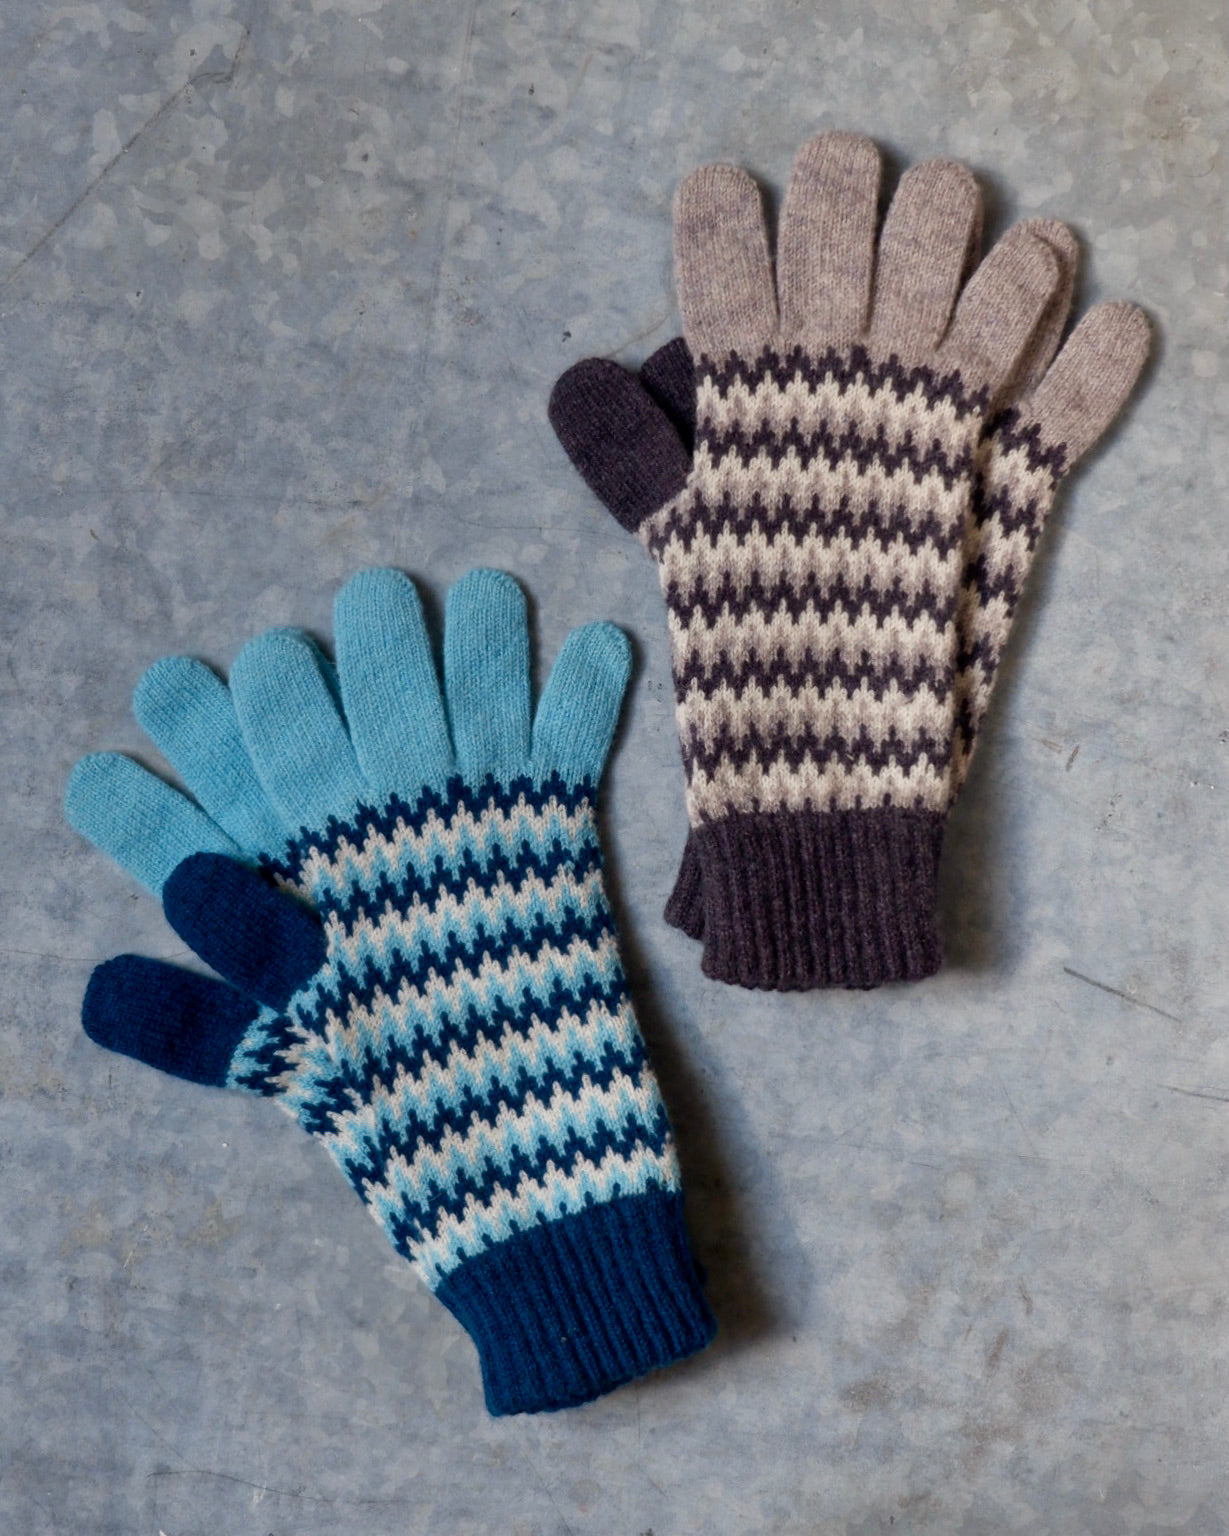 sally nencini textiles knit lambswool gloves homeware clothing